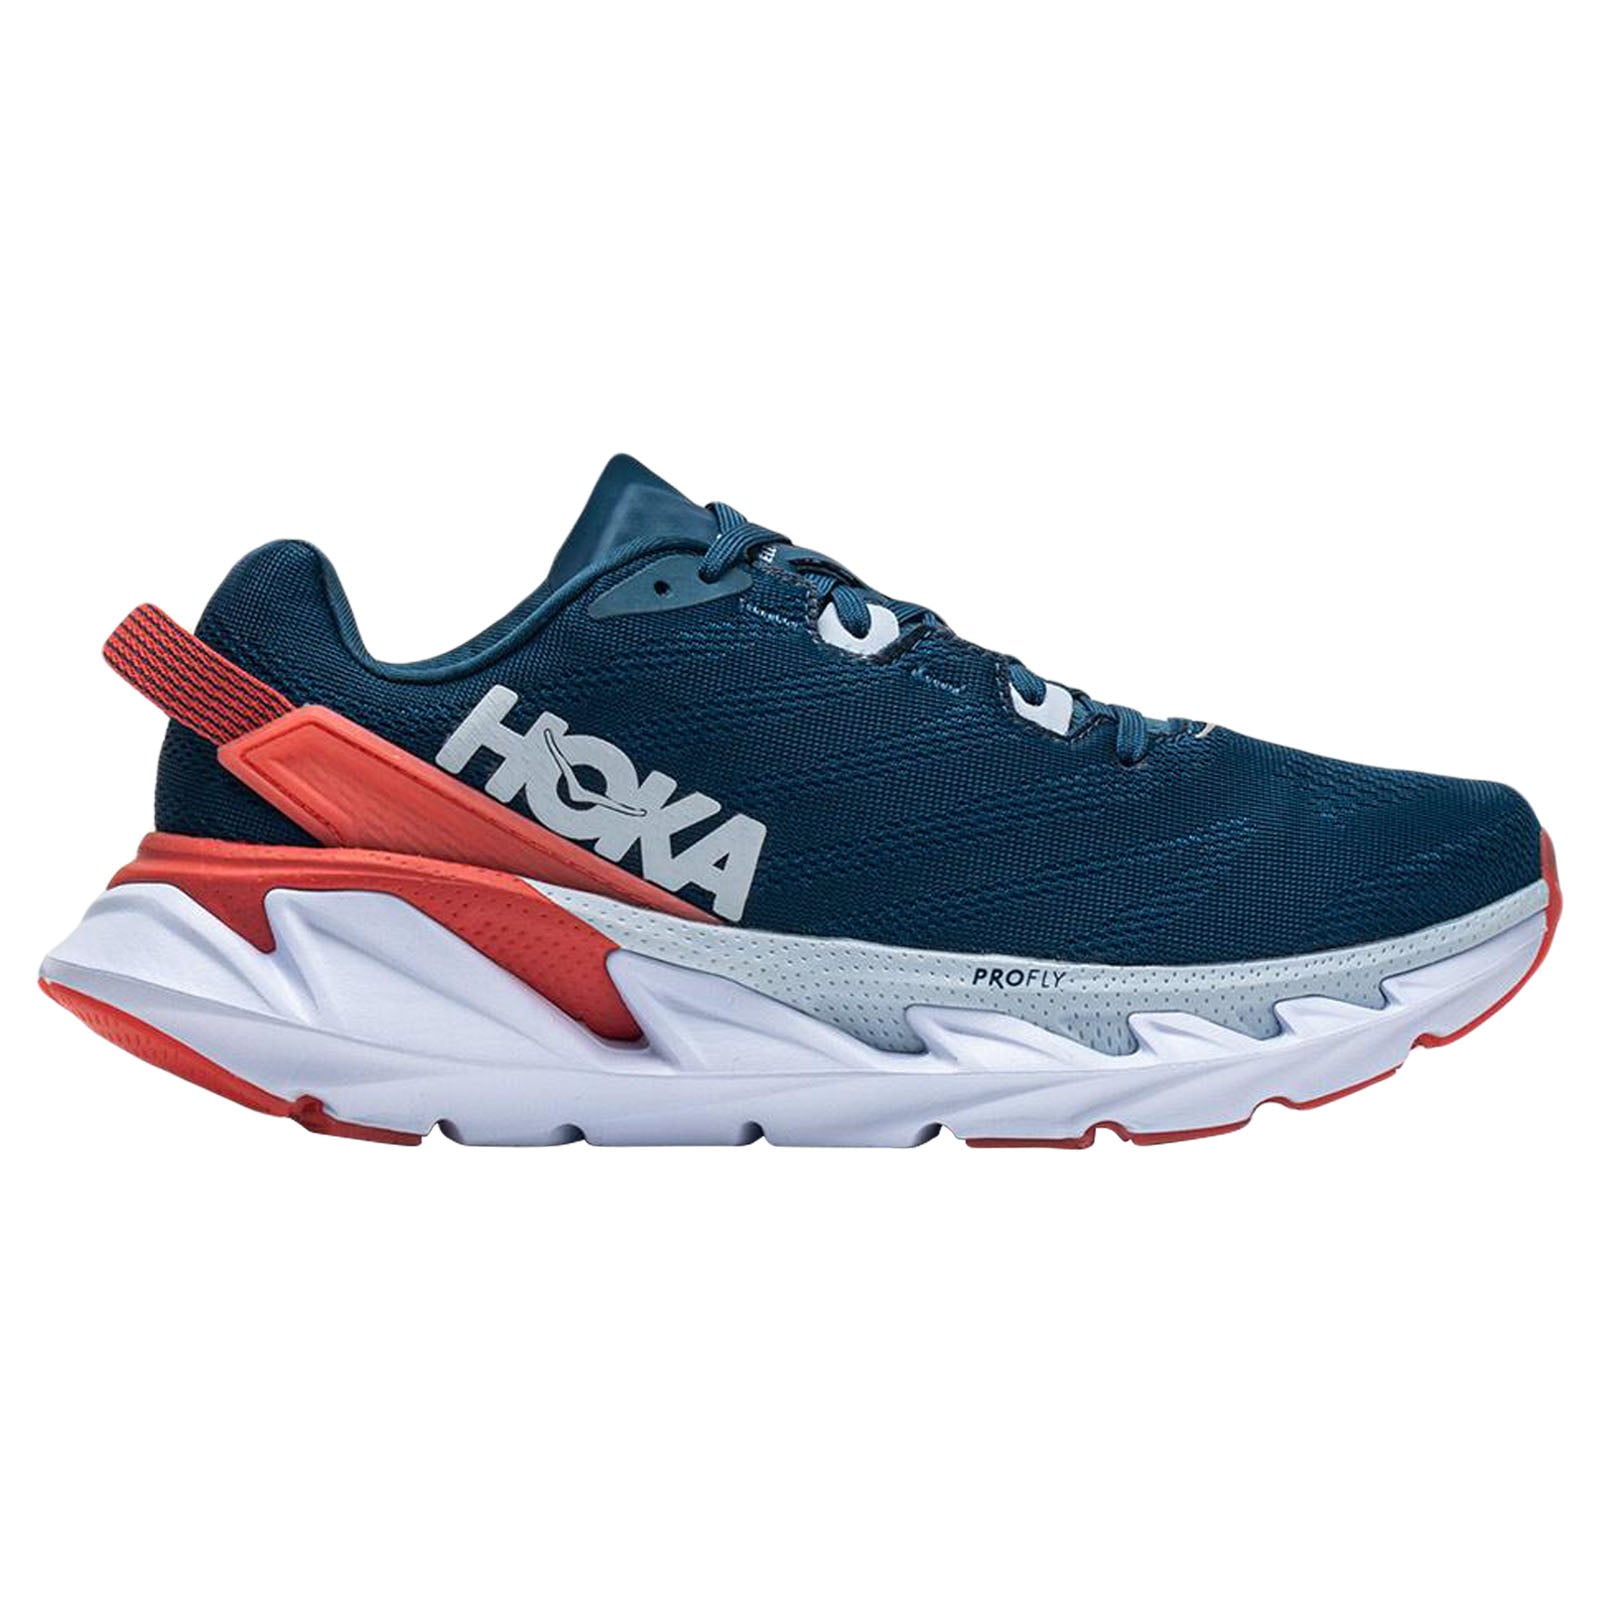 Hoka One One Elevon 2 Mesh Women's Low-Top Road Running Trainers#color_moroccan blue hot coral